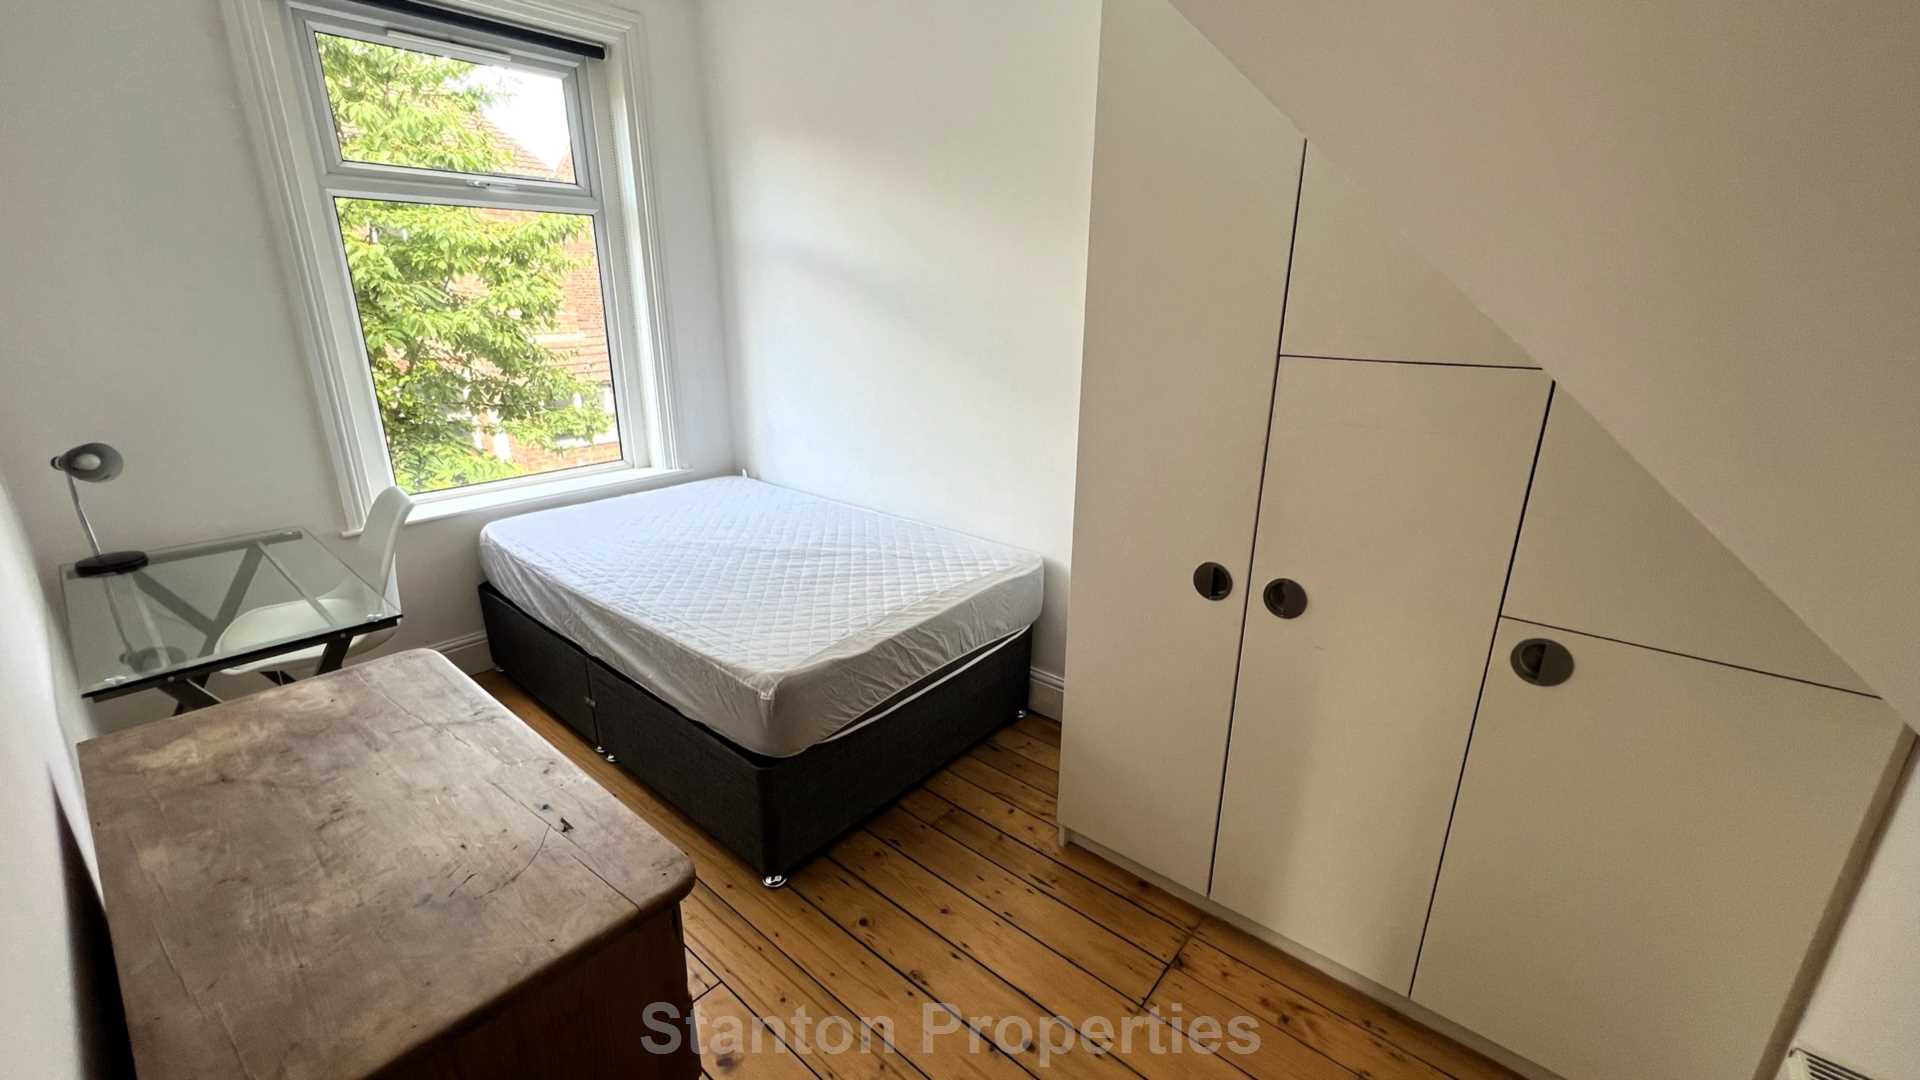 £145 pppw, Linden Grove, Fallowfield, Image 17